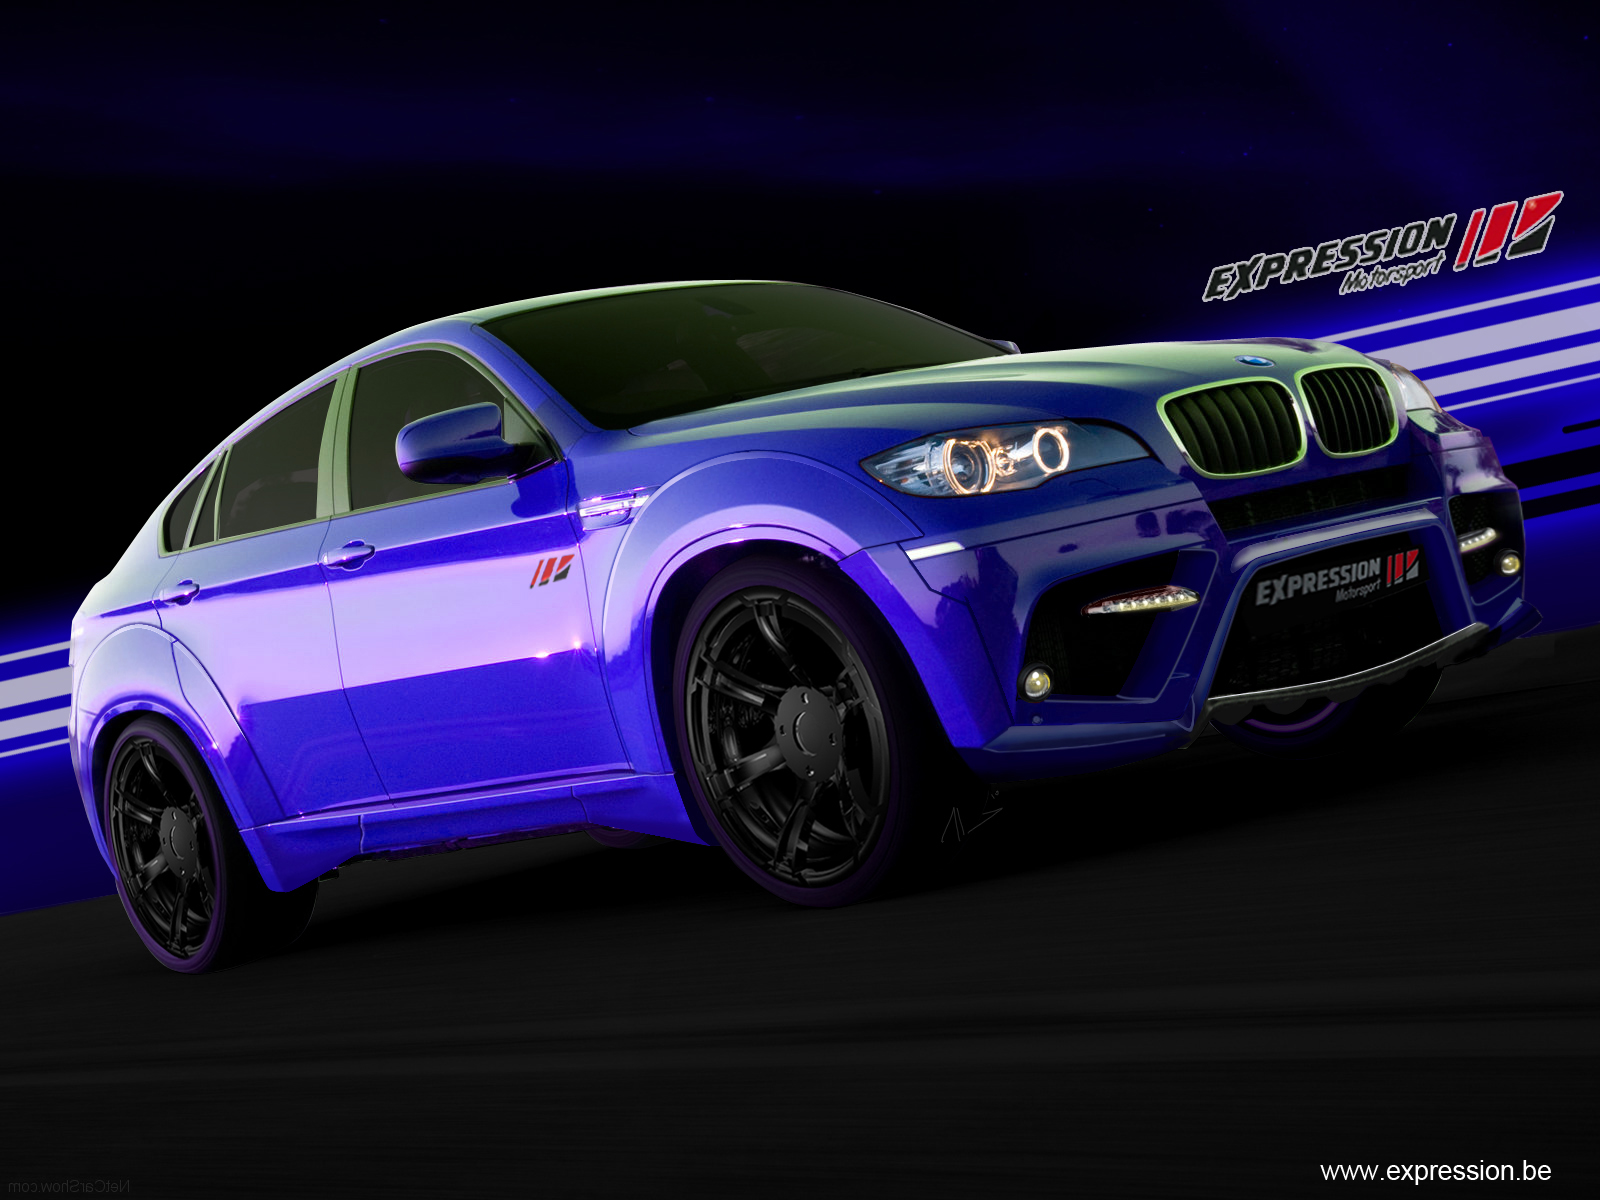 about the BMW X6 M tuned